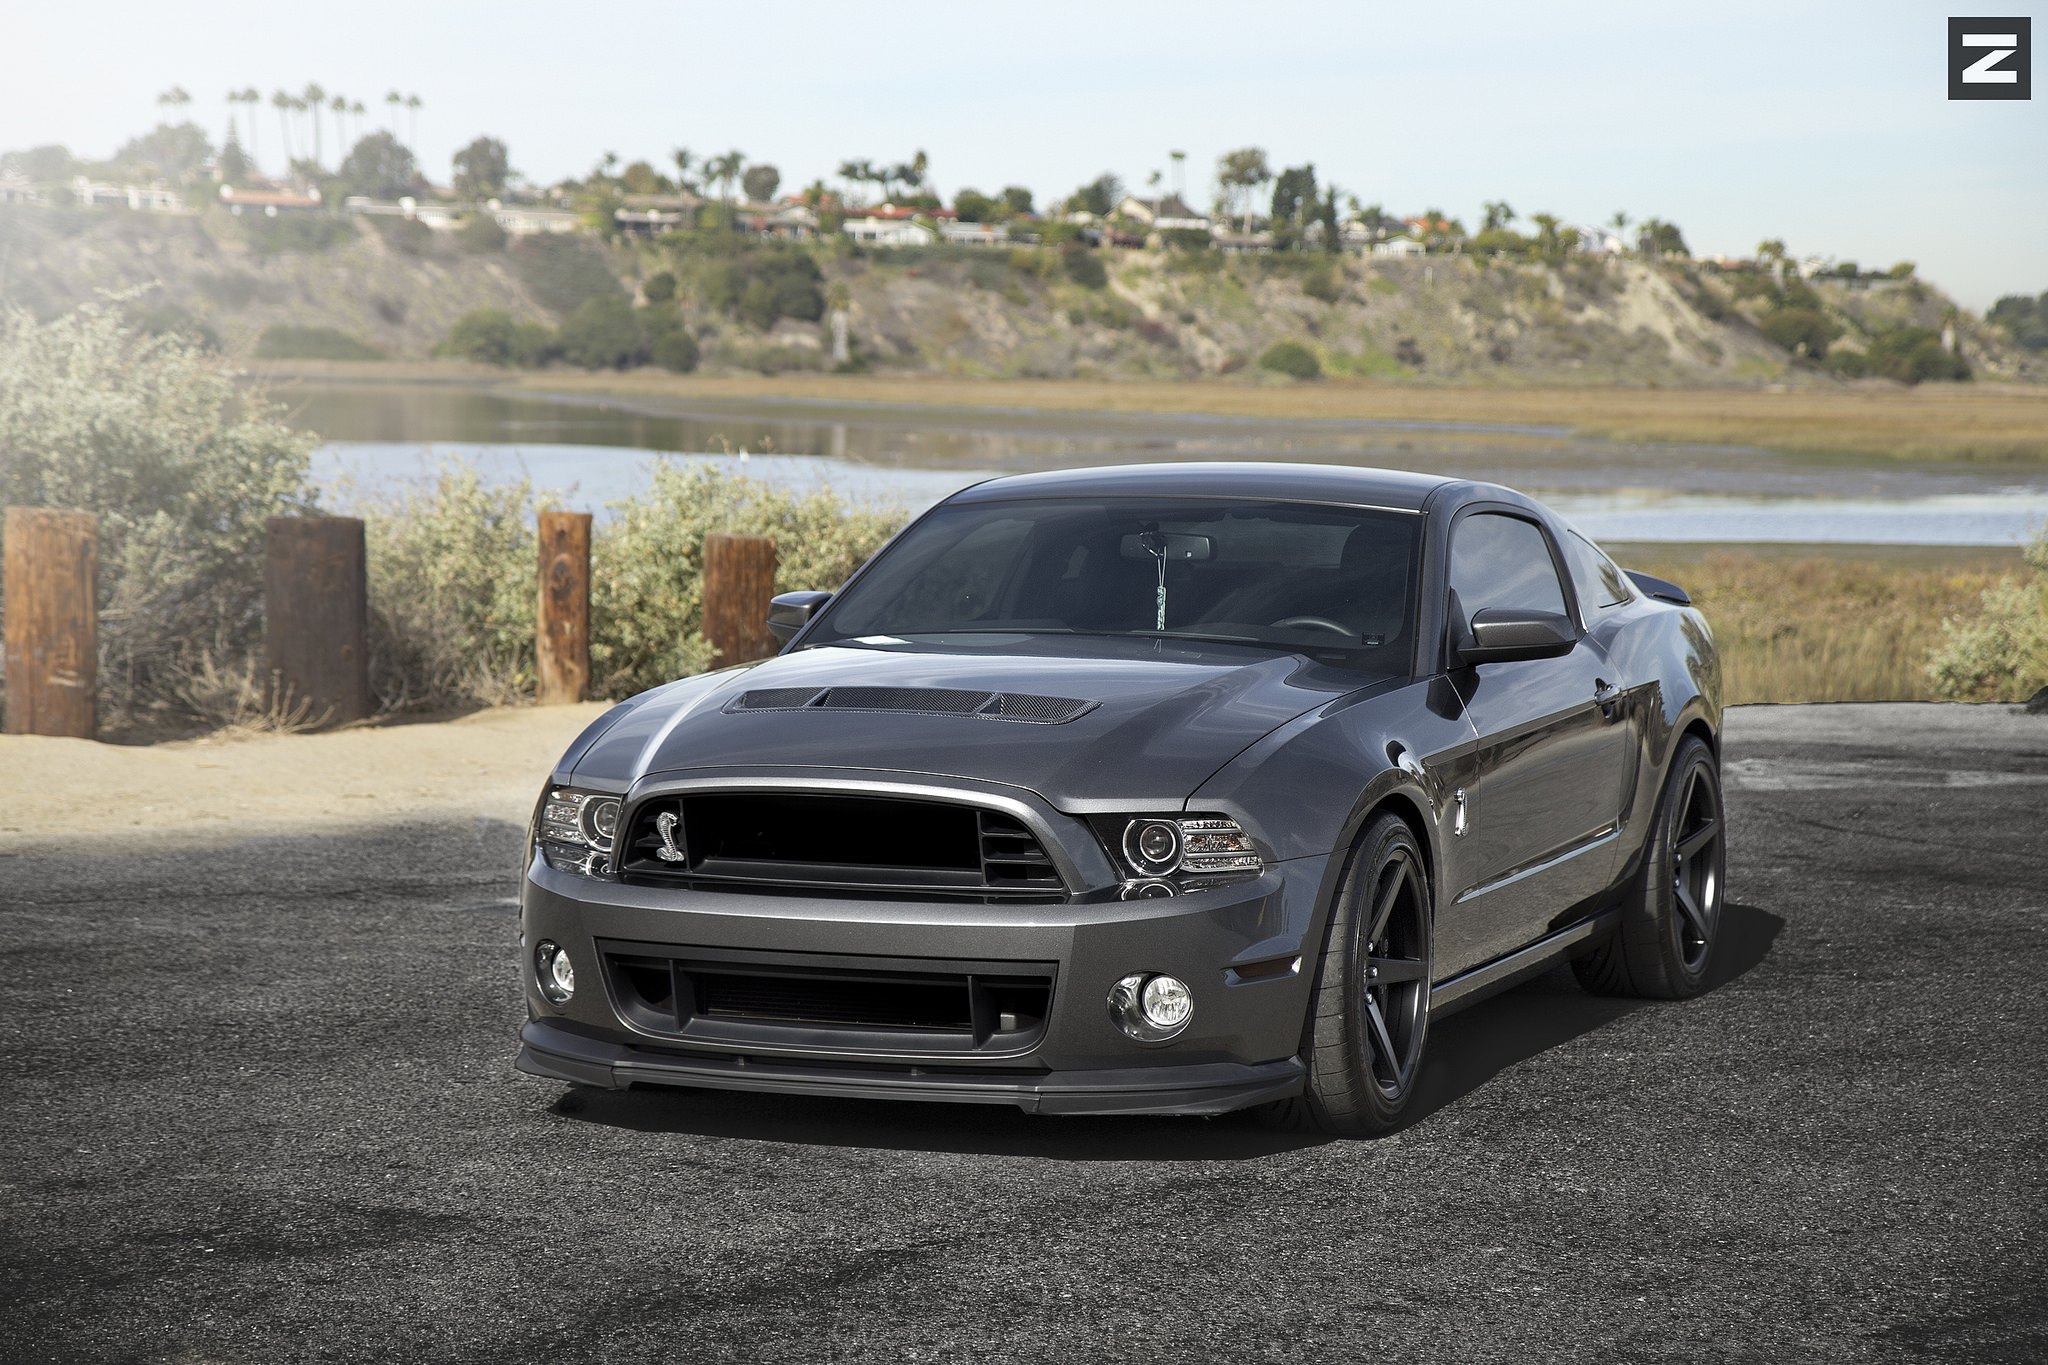 Front Bumper with Fog Lights on Gray Ford Mustang - Photo by Zito Wheels